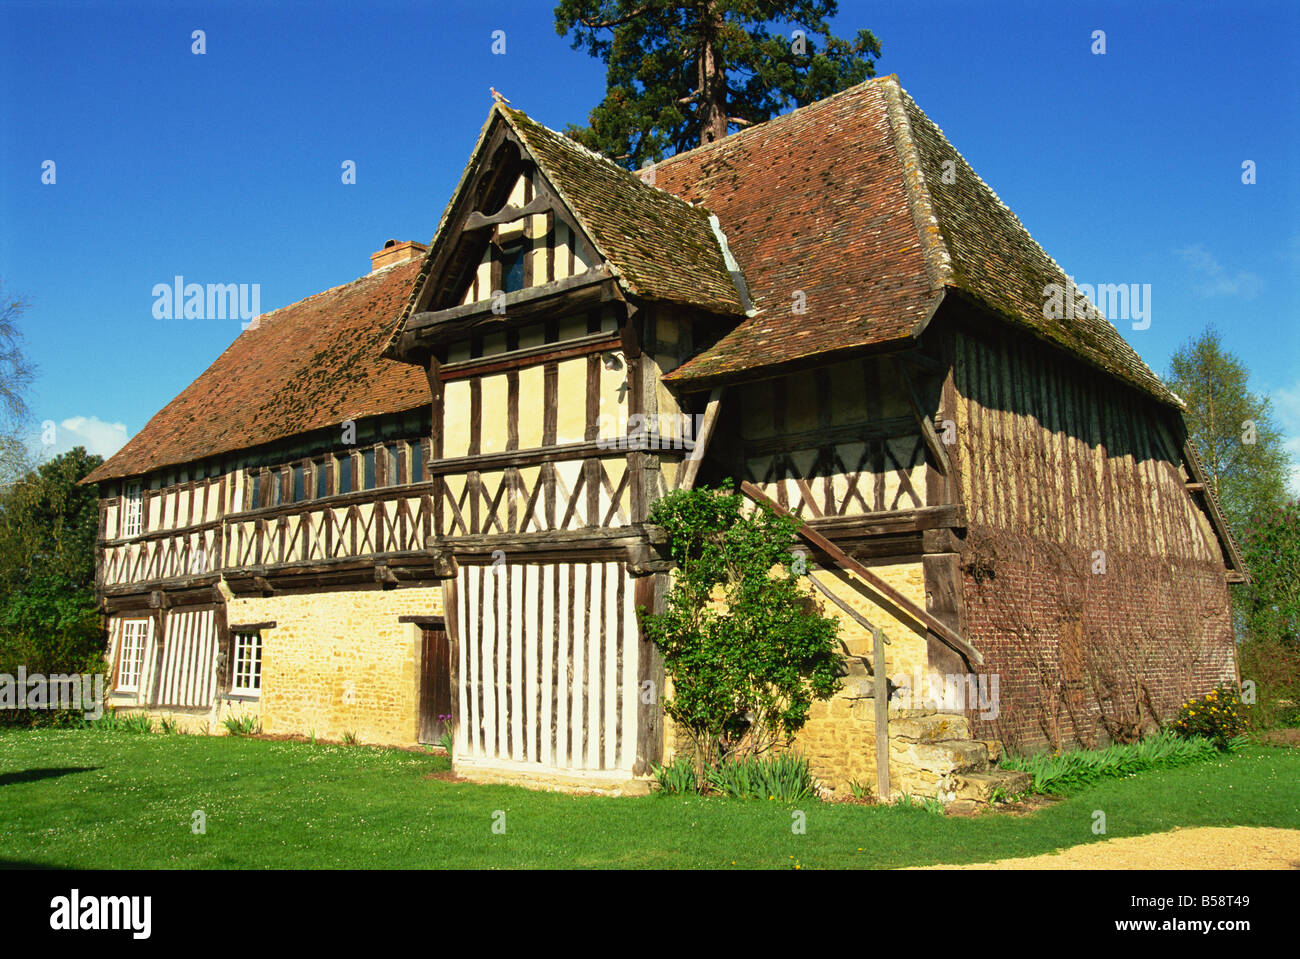 The Priory, Crevecoeur village, Basse Normandie, France, Europe Stock Photo